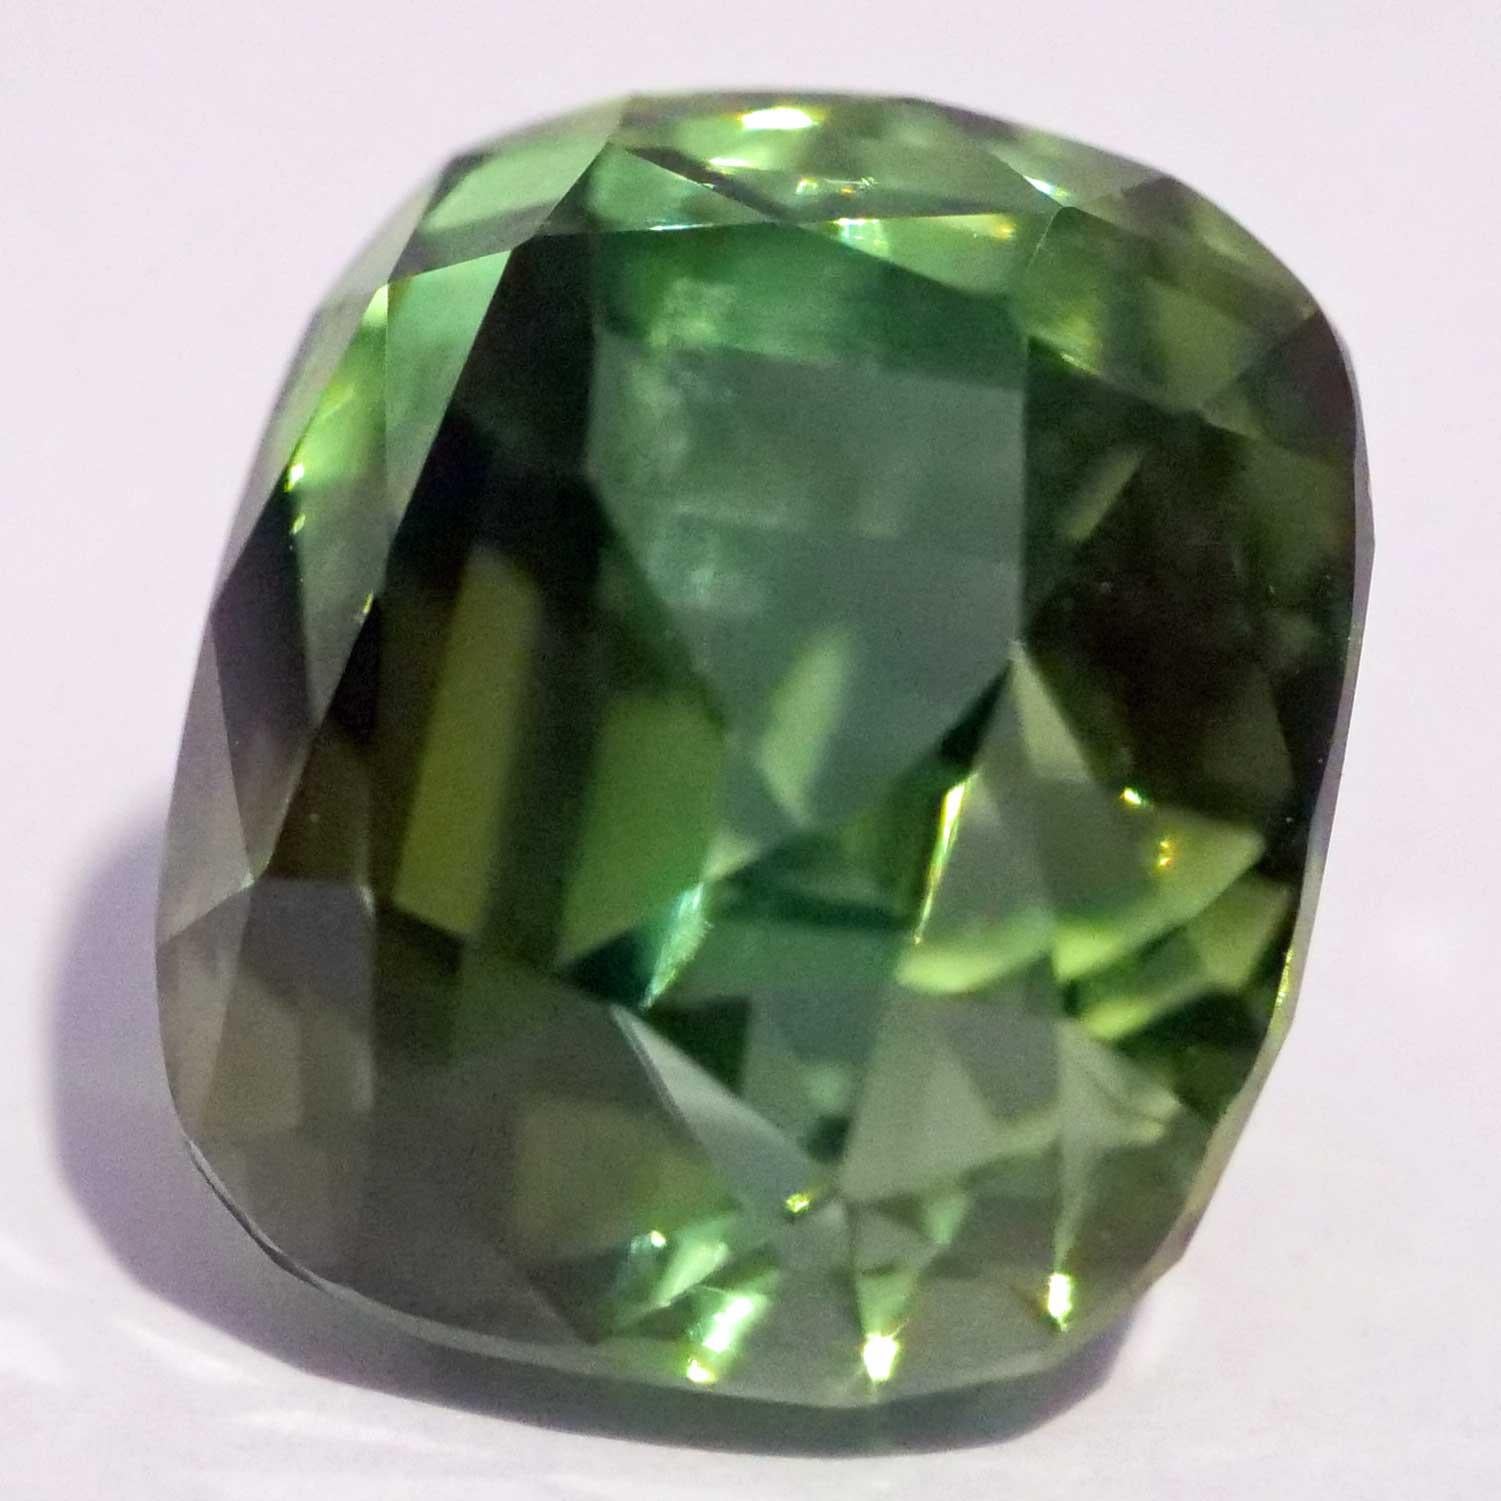 Antique Cushion Cut GLA Certificate Tourmaline  Afghanistan green-mint 8.45 ct Investment Gemstone For Sale